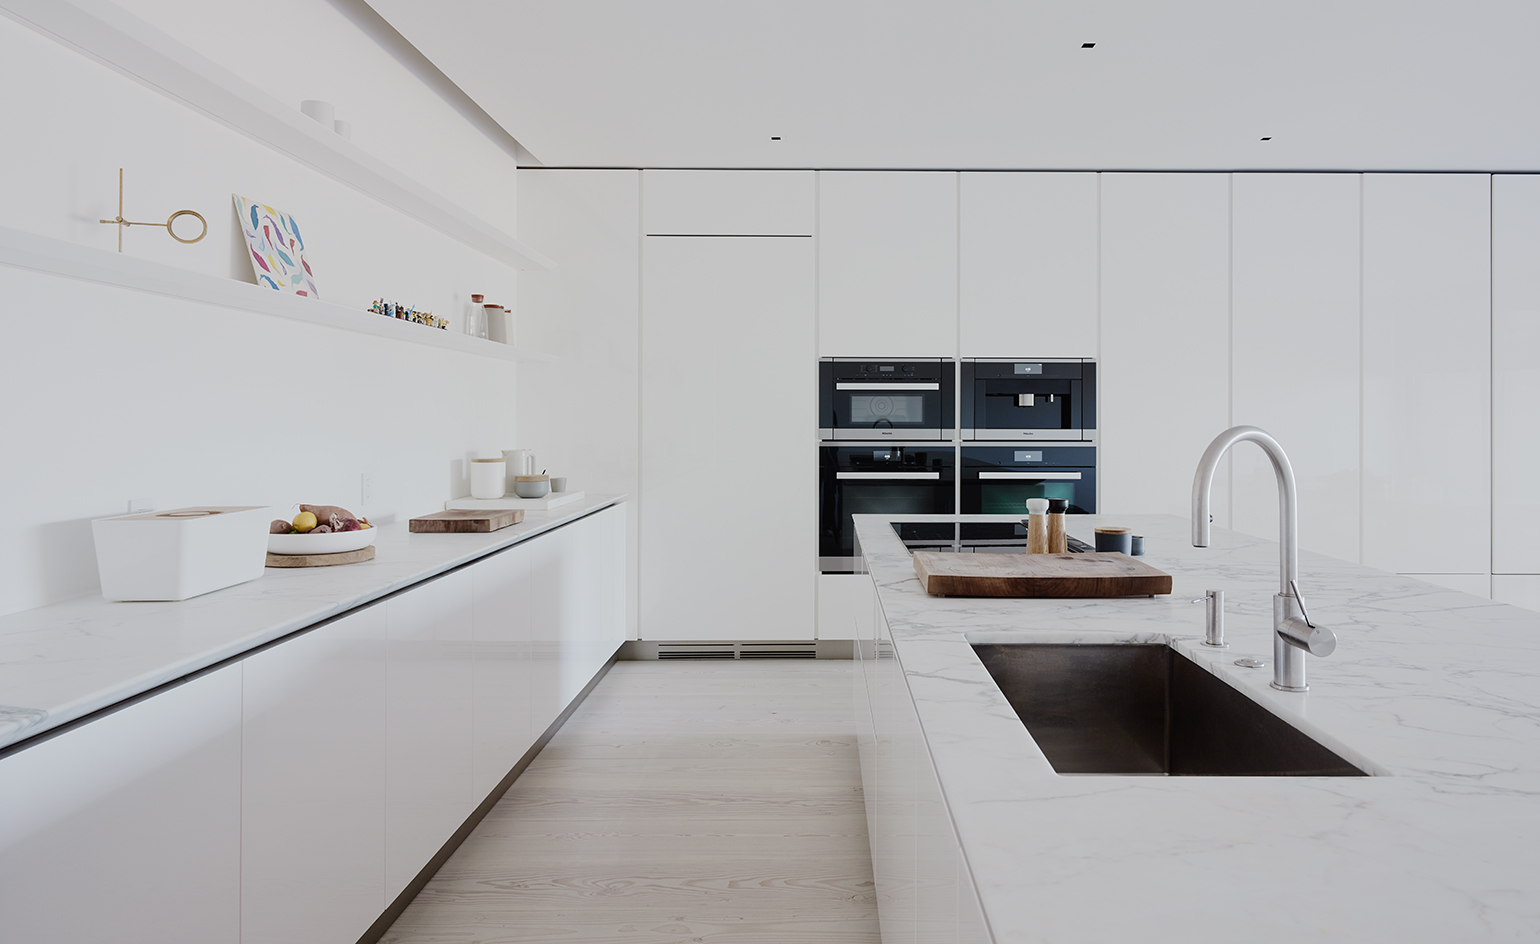 The kitchen is all-white, with no handle cabinets and built-in appliances to give it a sleek look